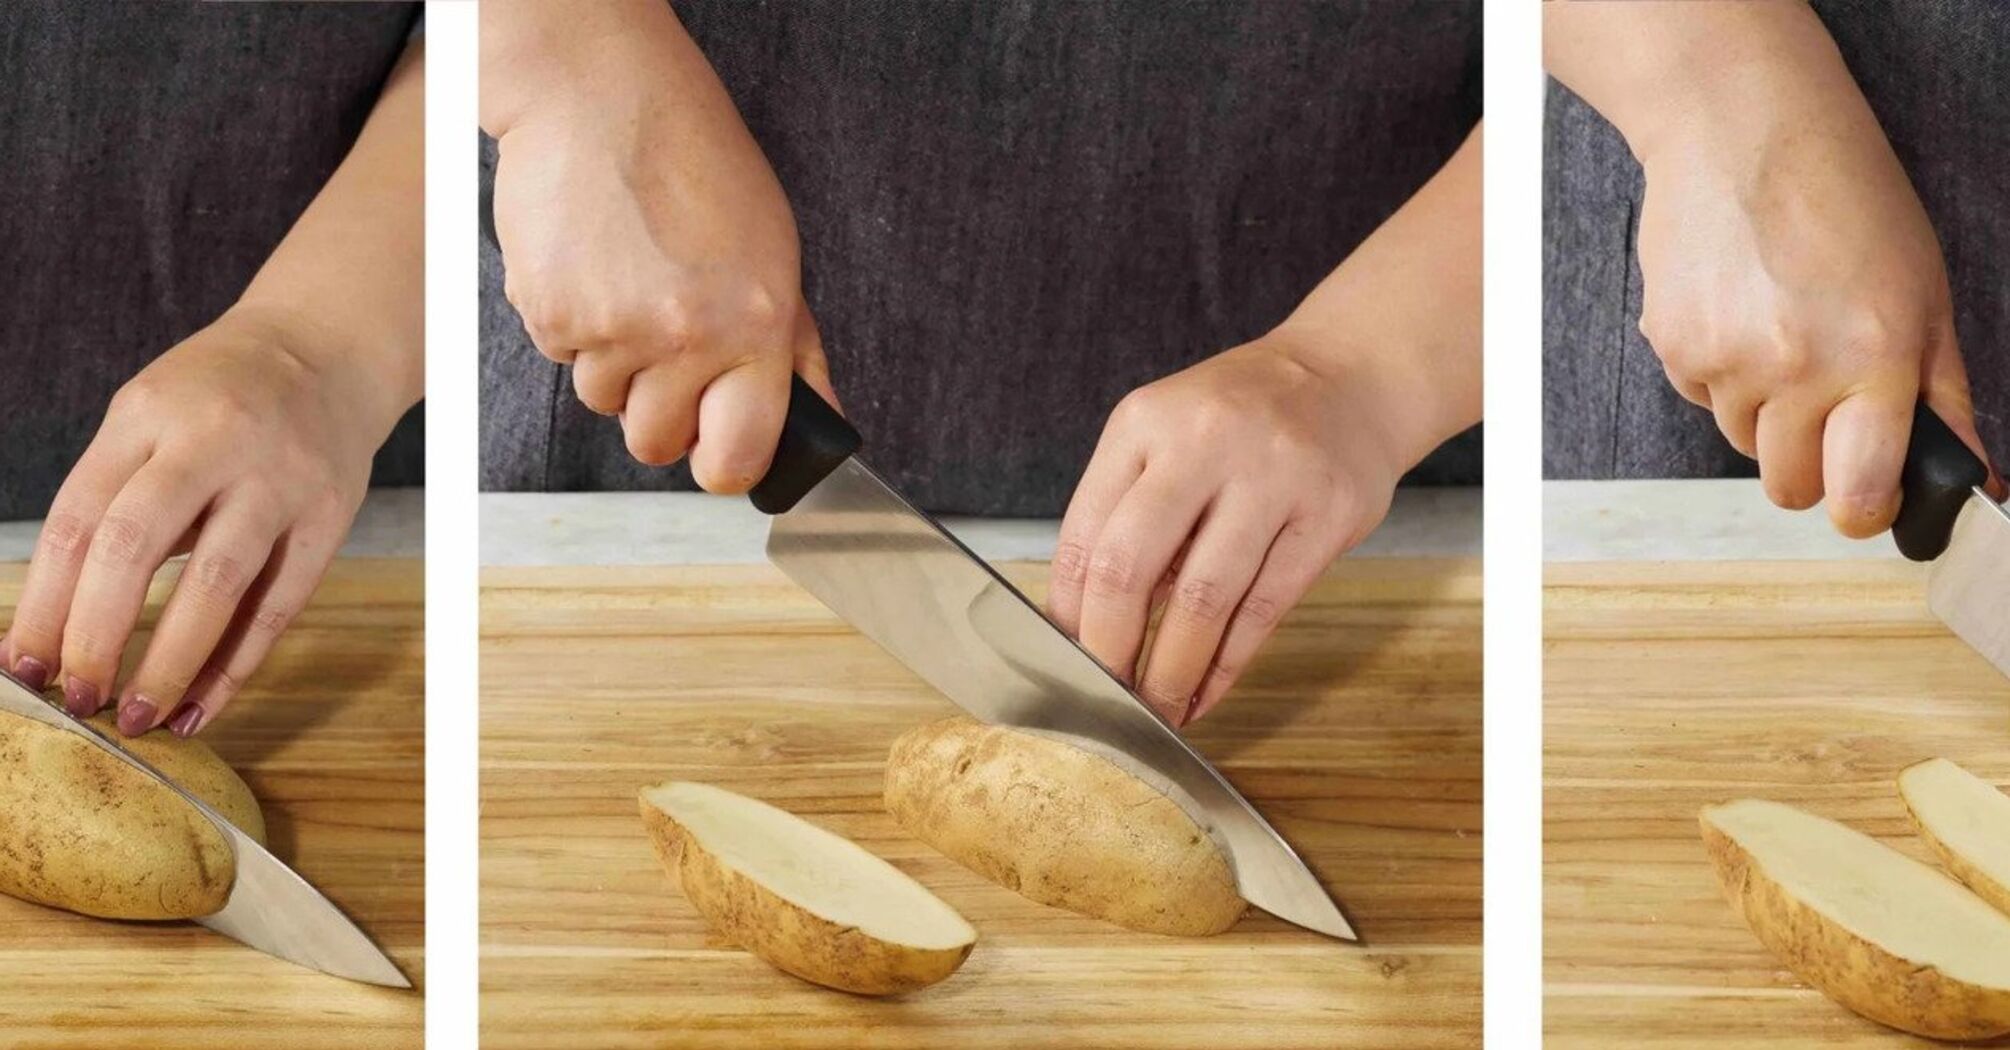 How to properly cut food